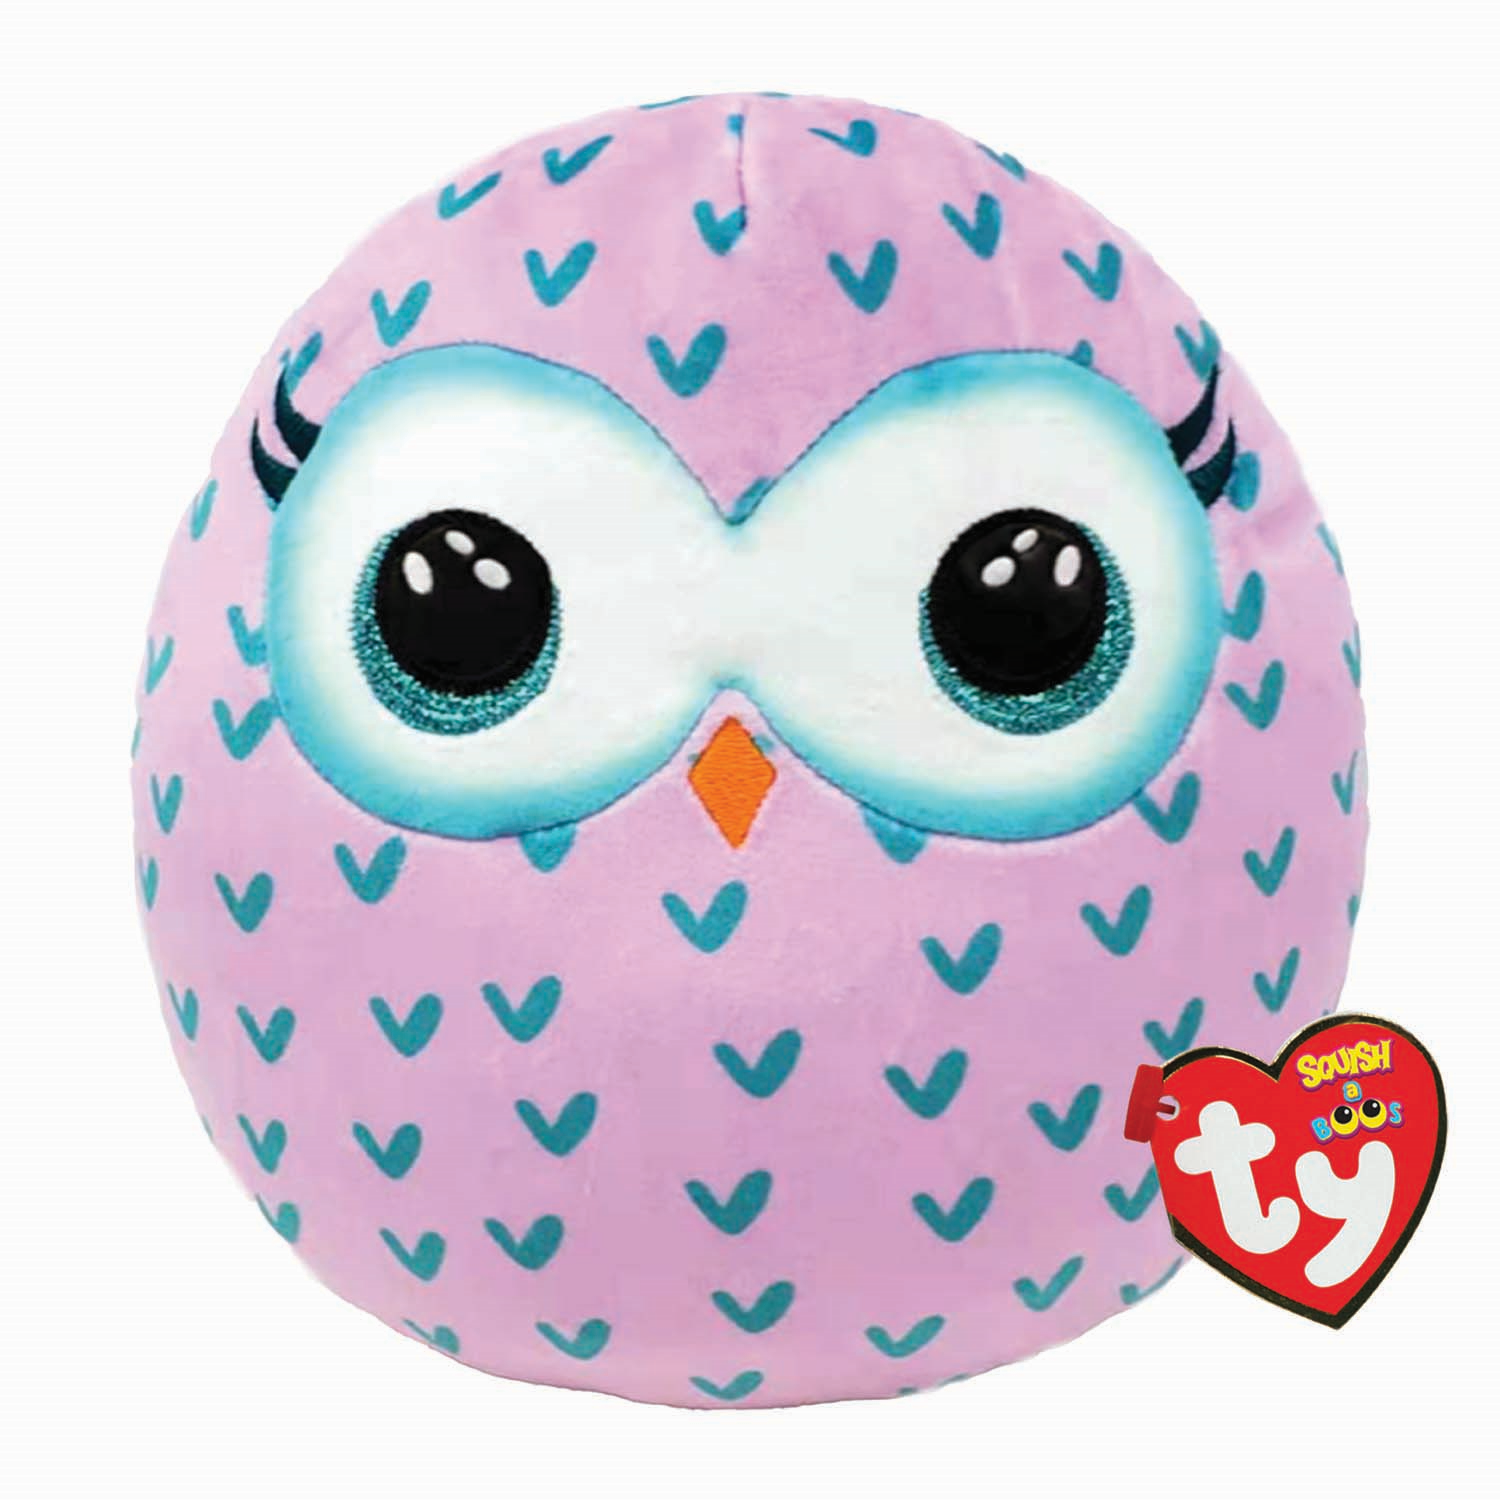 WINKS OWL - SQUISH-A-BOO - 10"